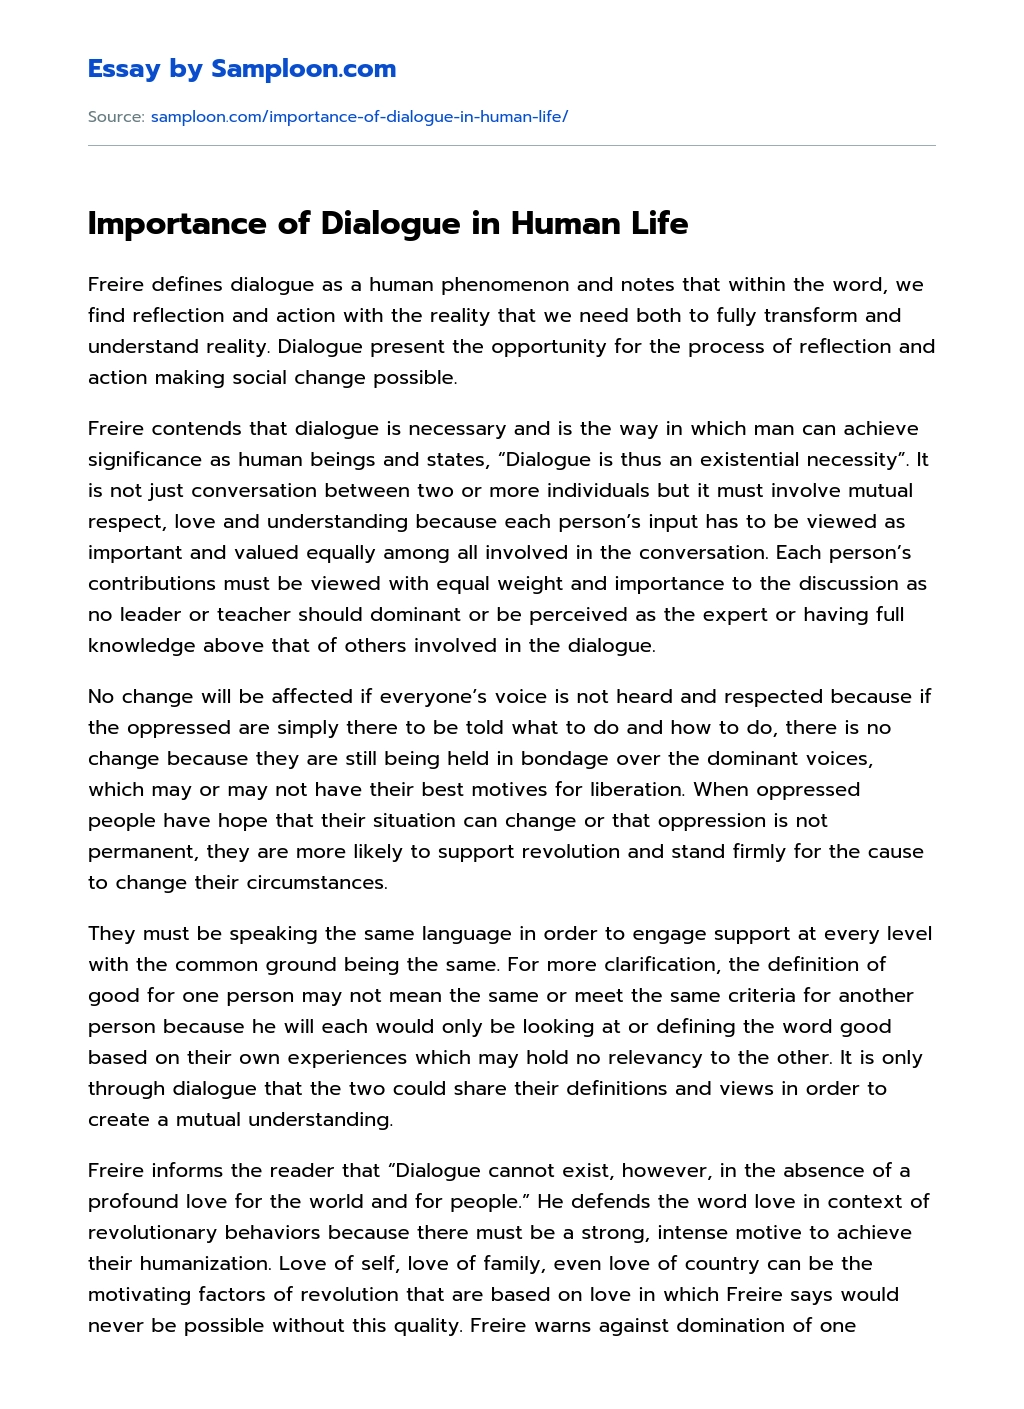 Importance of Dialogue in Human Life essay